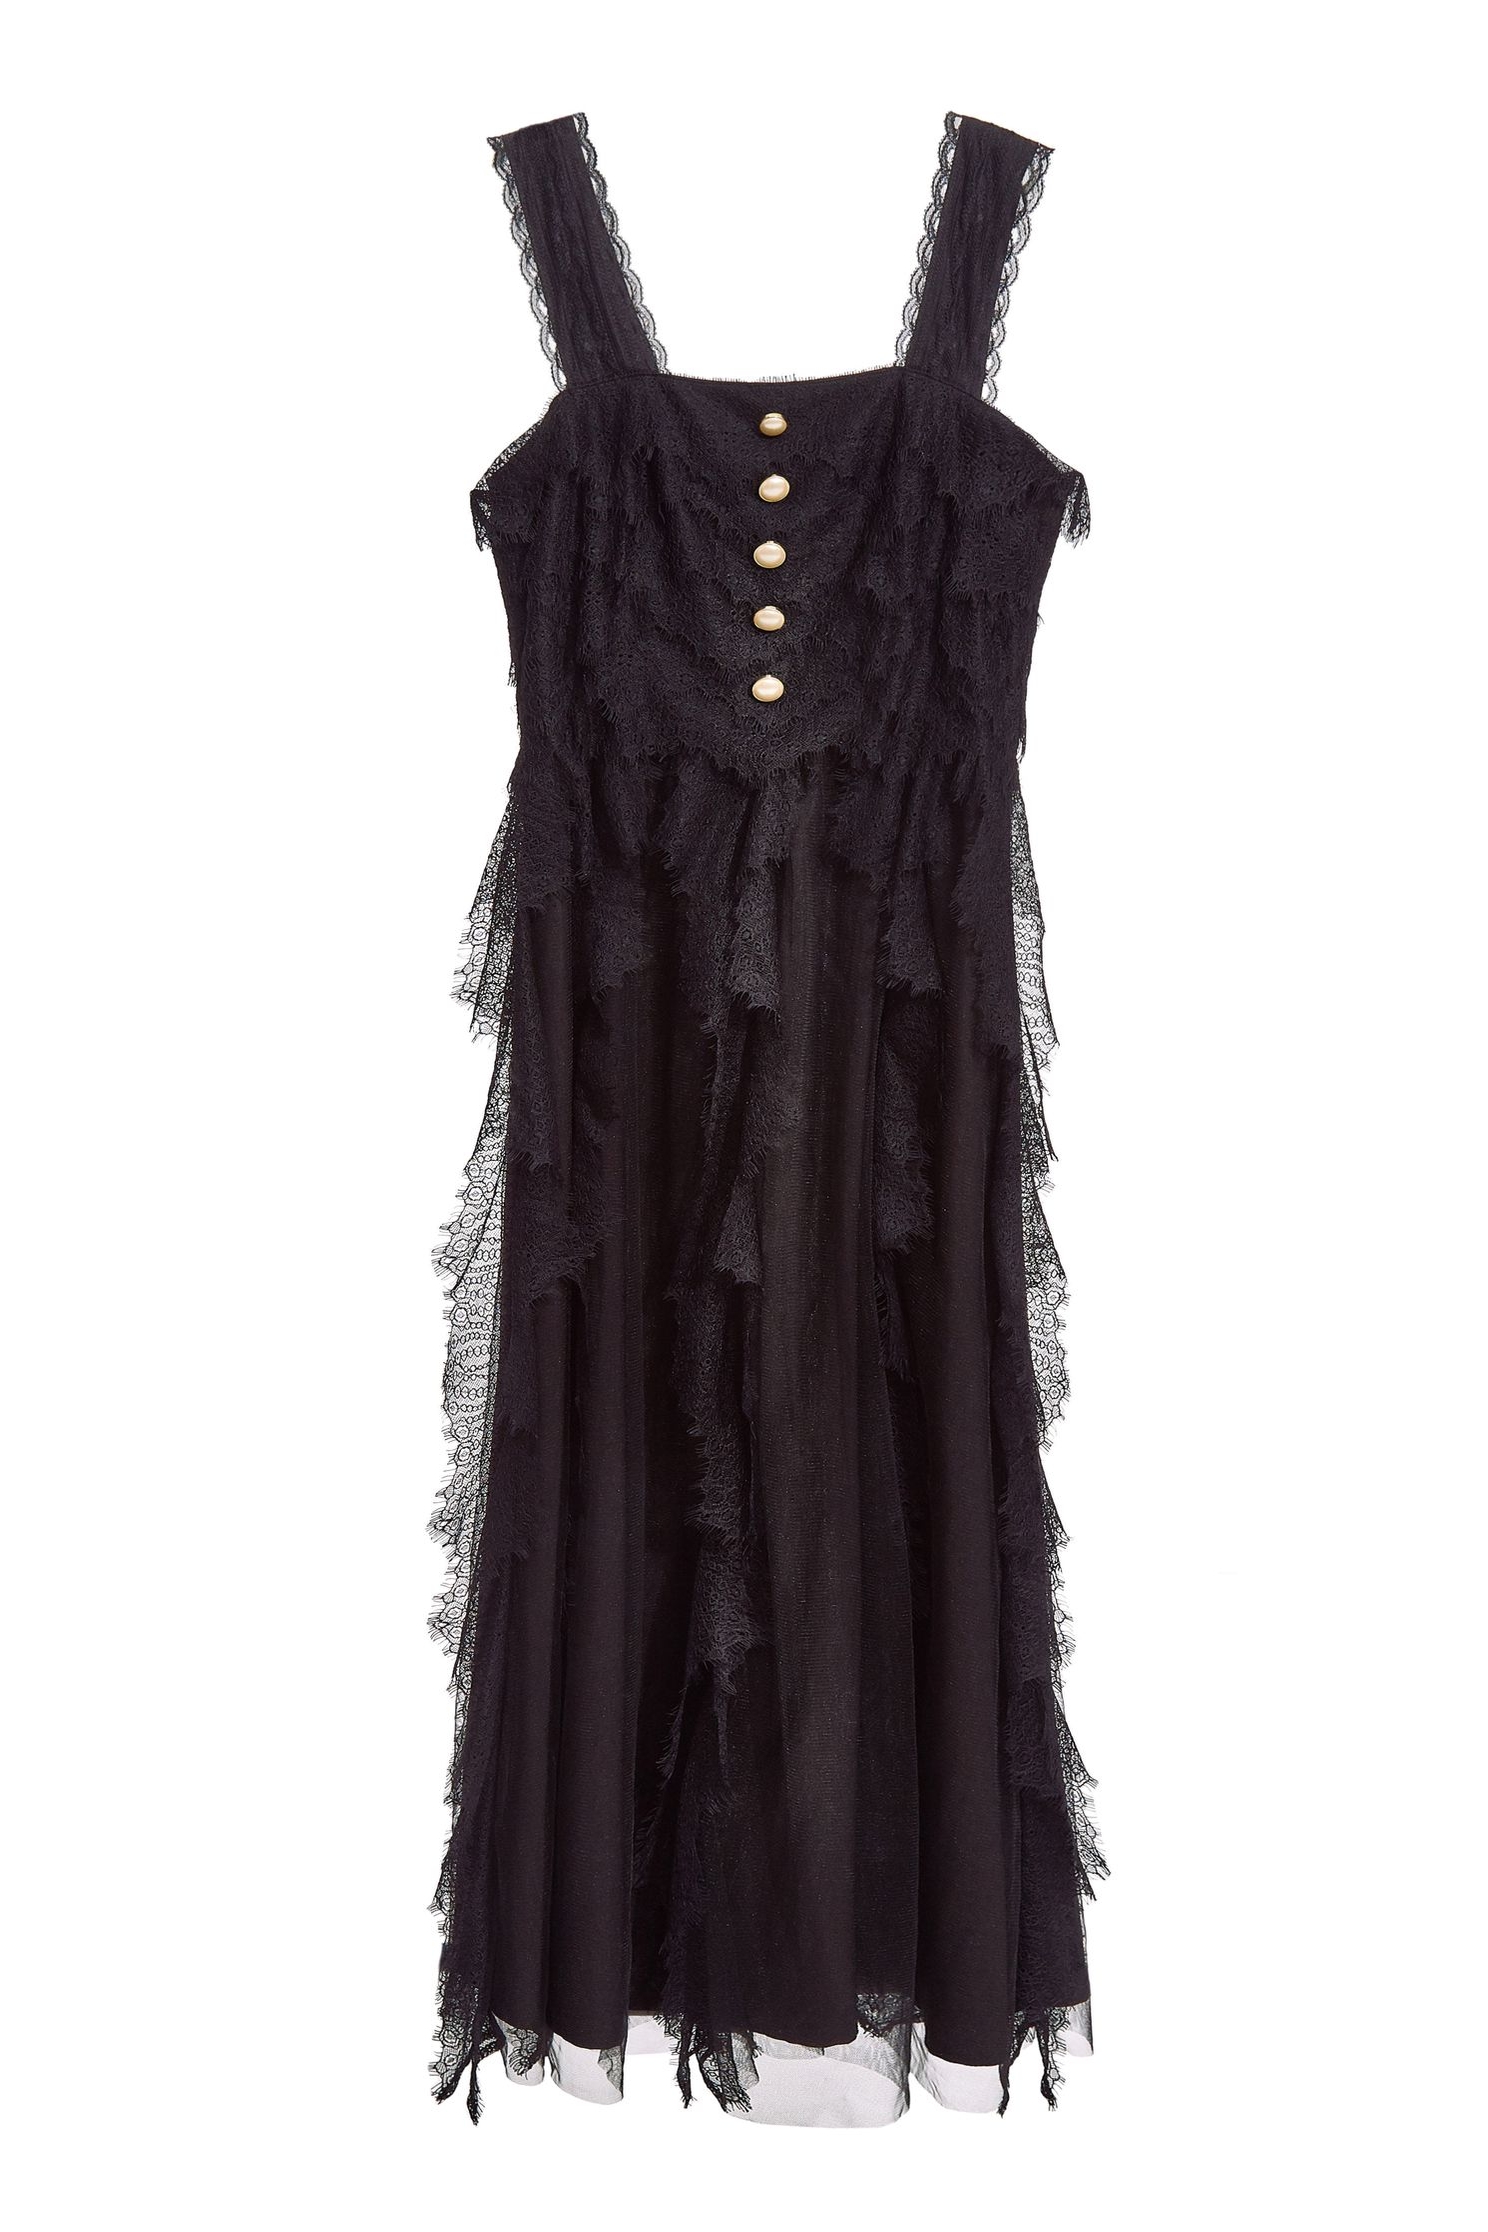 Loose-fitting long dress with strappy lace,Dresses,cocktaildresses,Sleeveless dresses,Evening dresses,Season (AW) Look,Lace,Lace dresses,Black dresses